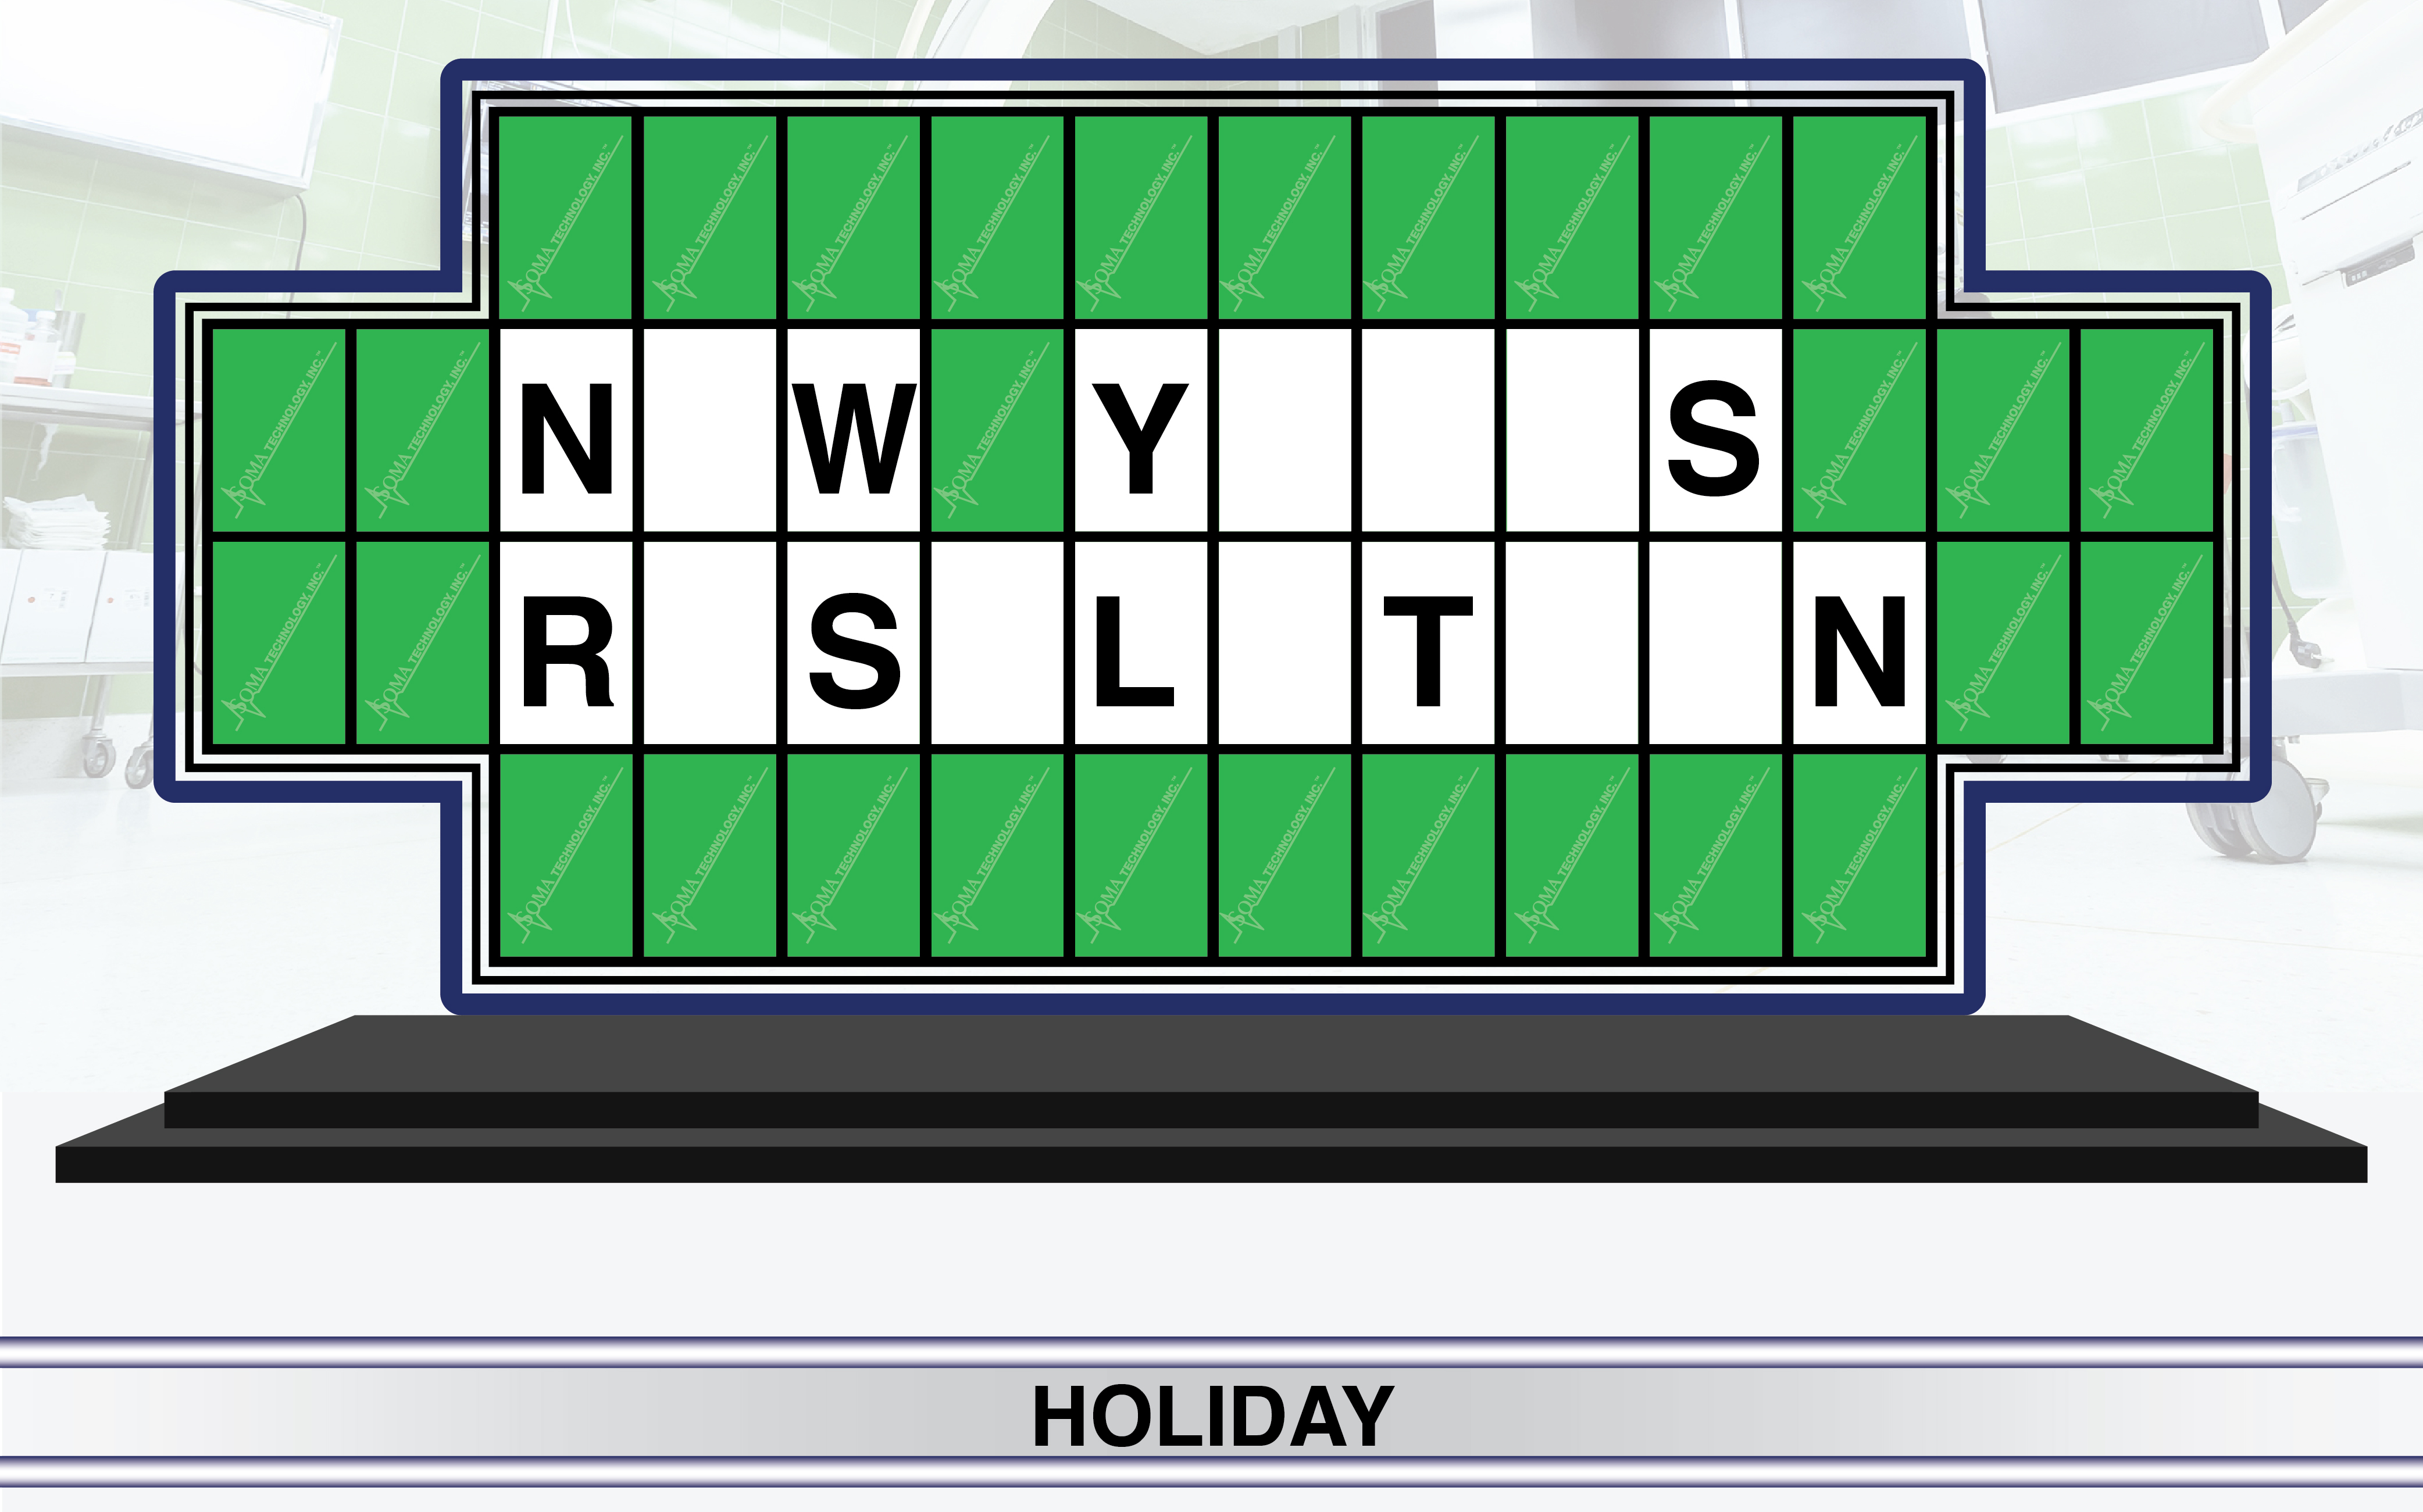 New Year's Resolutions - Wheel of Fortune - Soma Technology Trivia